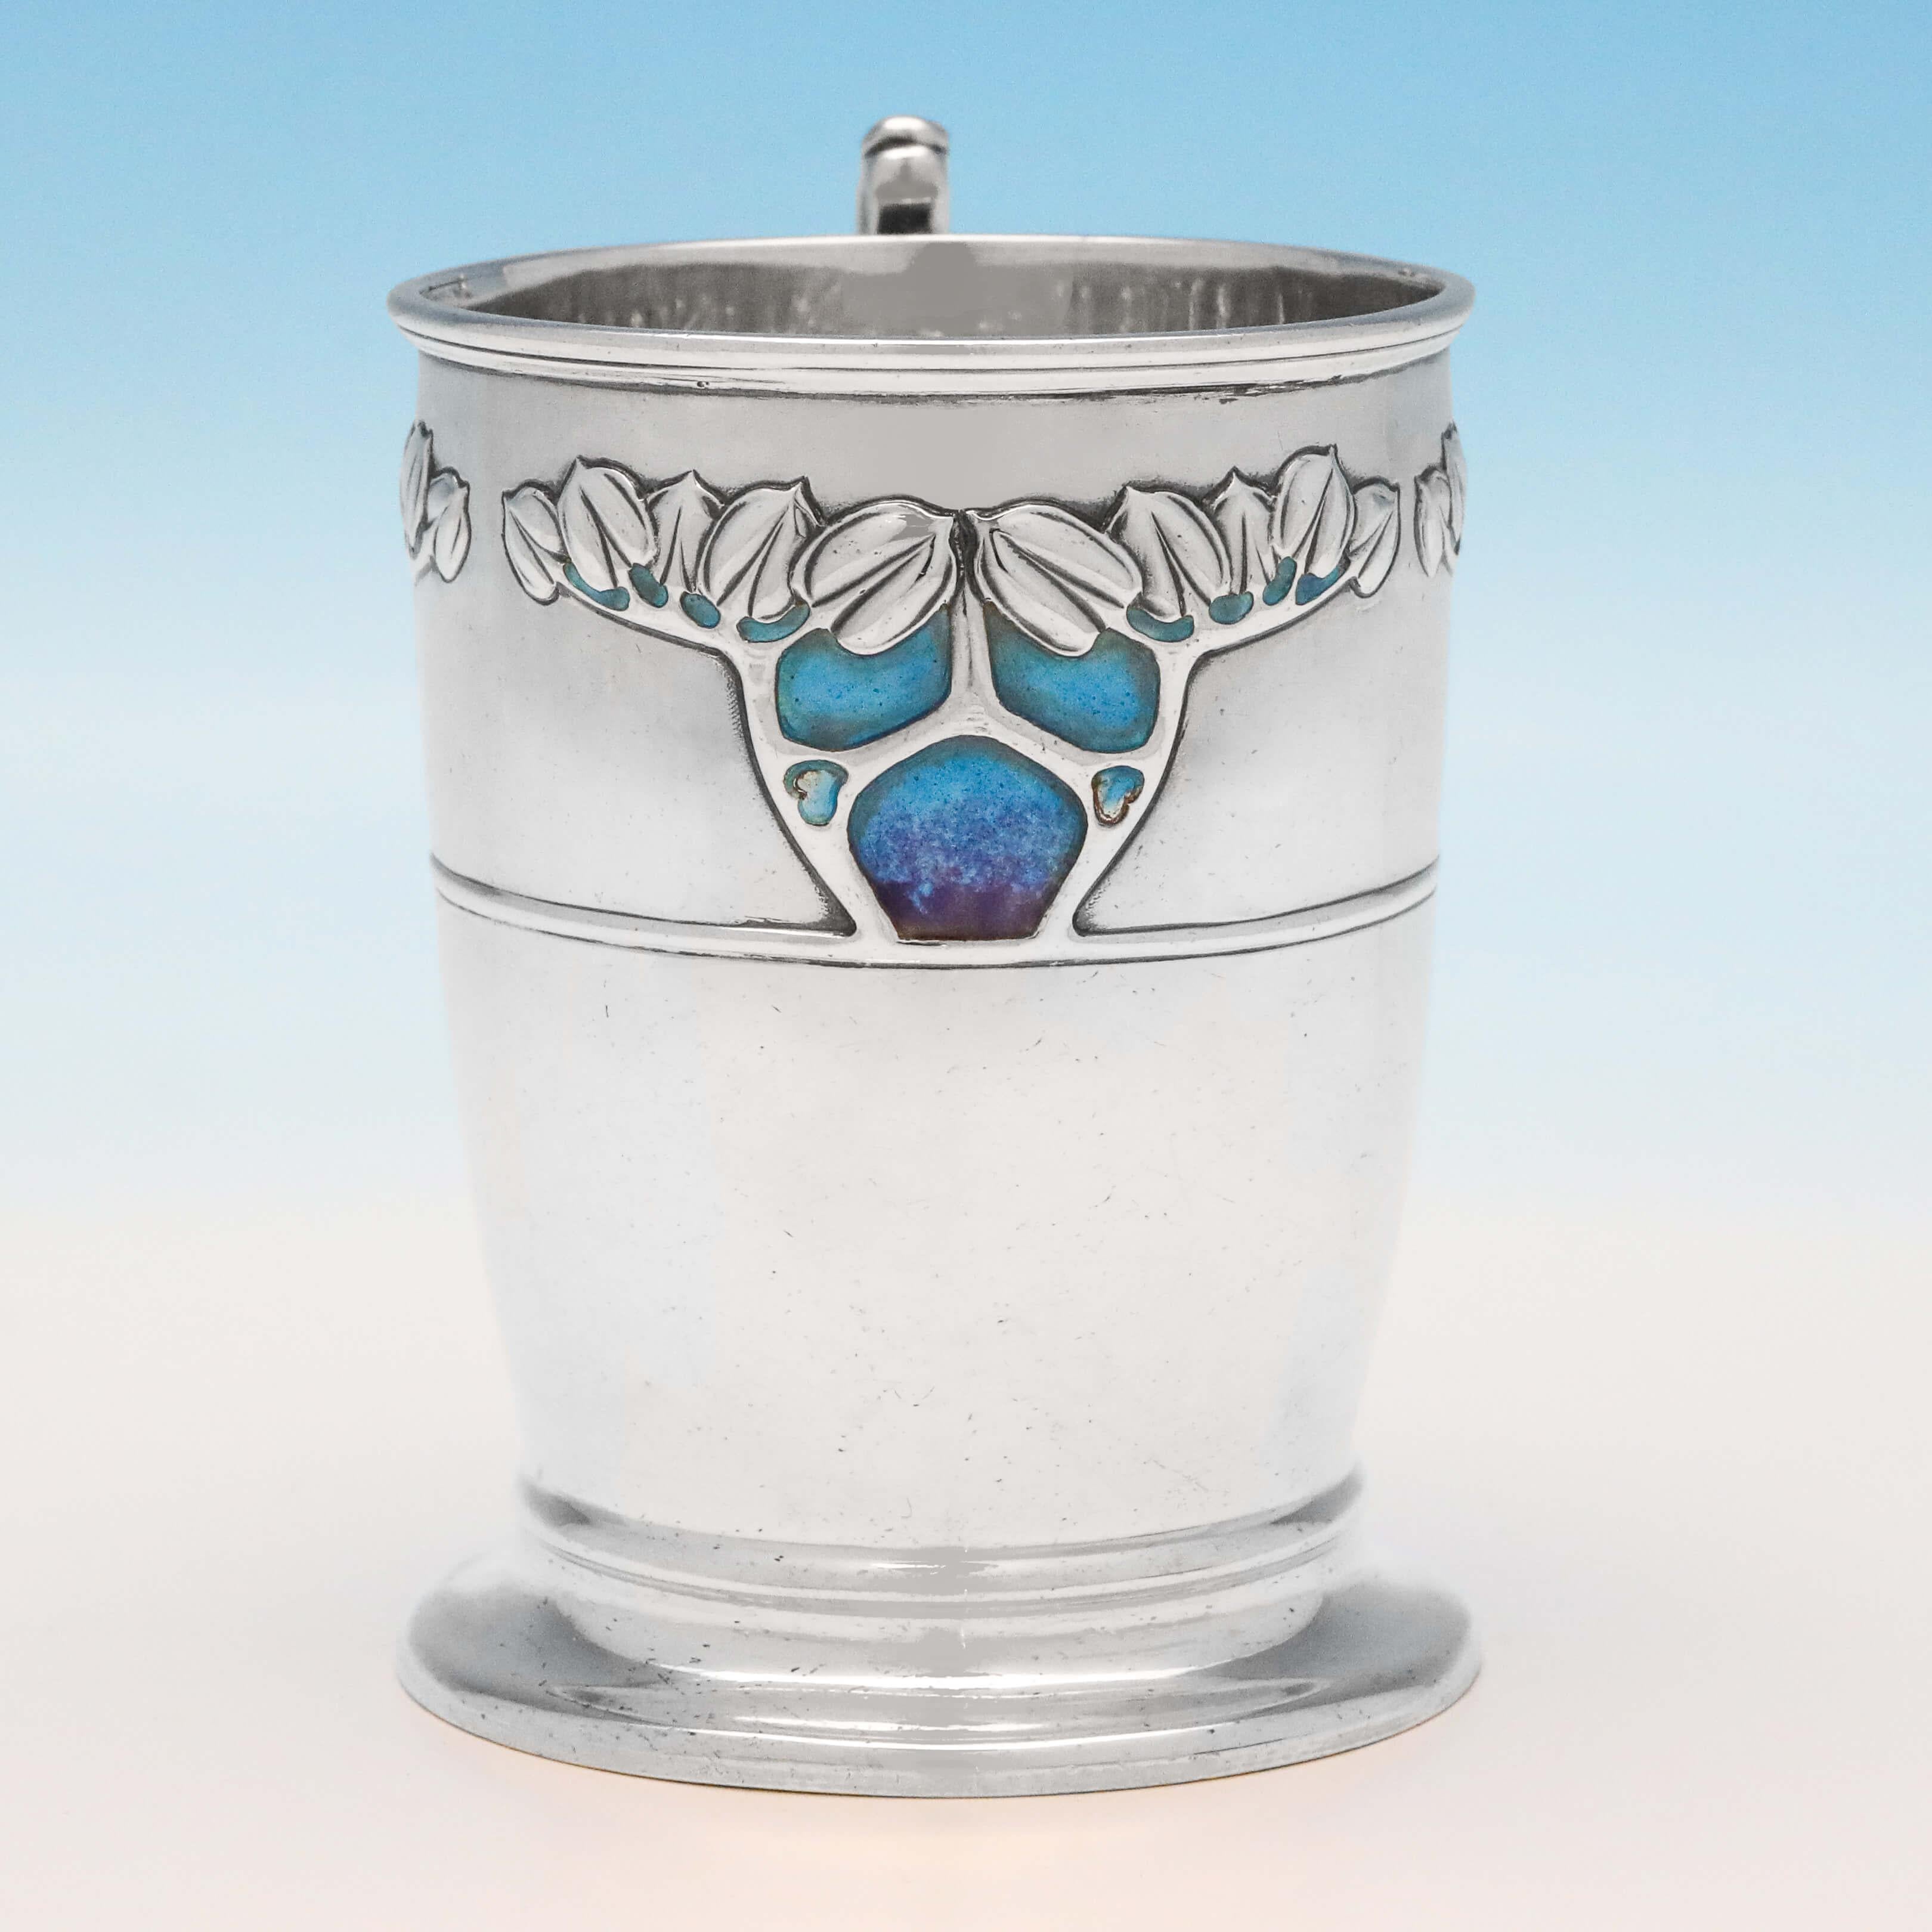 Hallmarked in London in 1903 by George Lawrence Connell, this stunning, Arts & Crafts period, Antique, Sterling Silver Mug, features beautiful Art Nouveau influenced decoration, with tree motifs and attractive purple to light blue enamel work. The